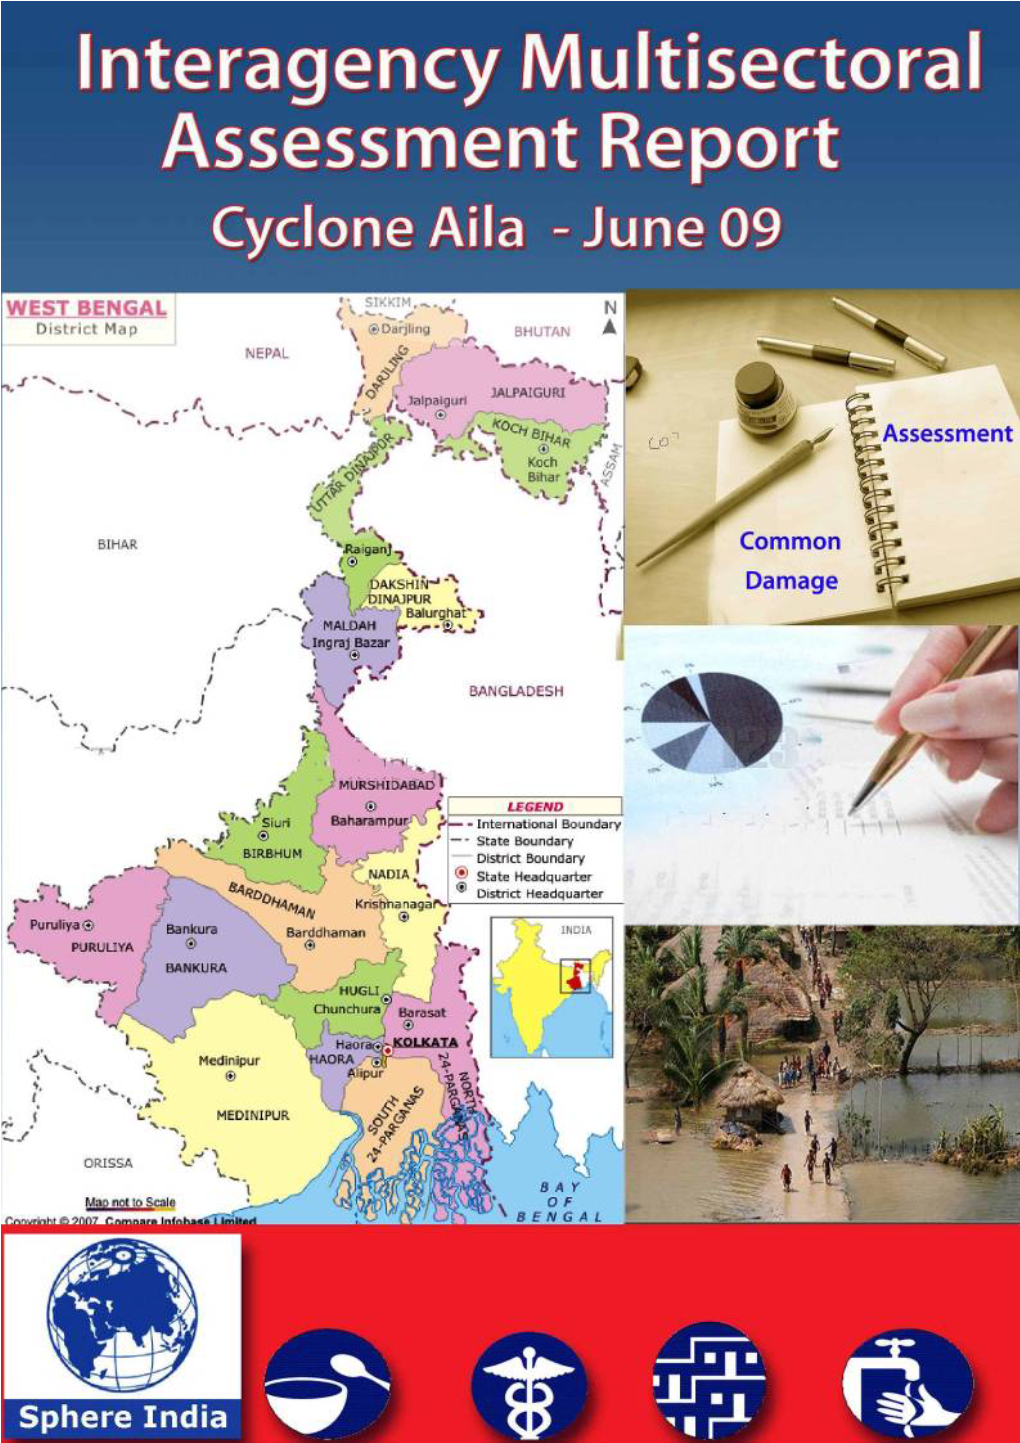 Sphere India: Unified Response Strategy ‐ Inter Agency Multi Sectoral Assessment, Cyclone Aila, June 2009 Page 1 of 64